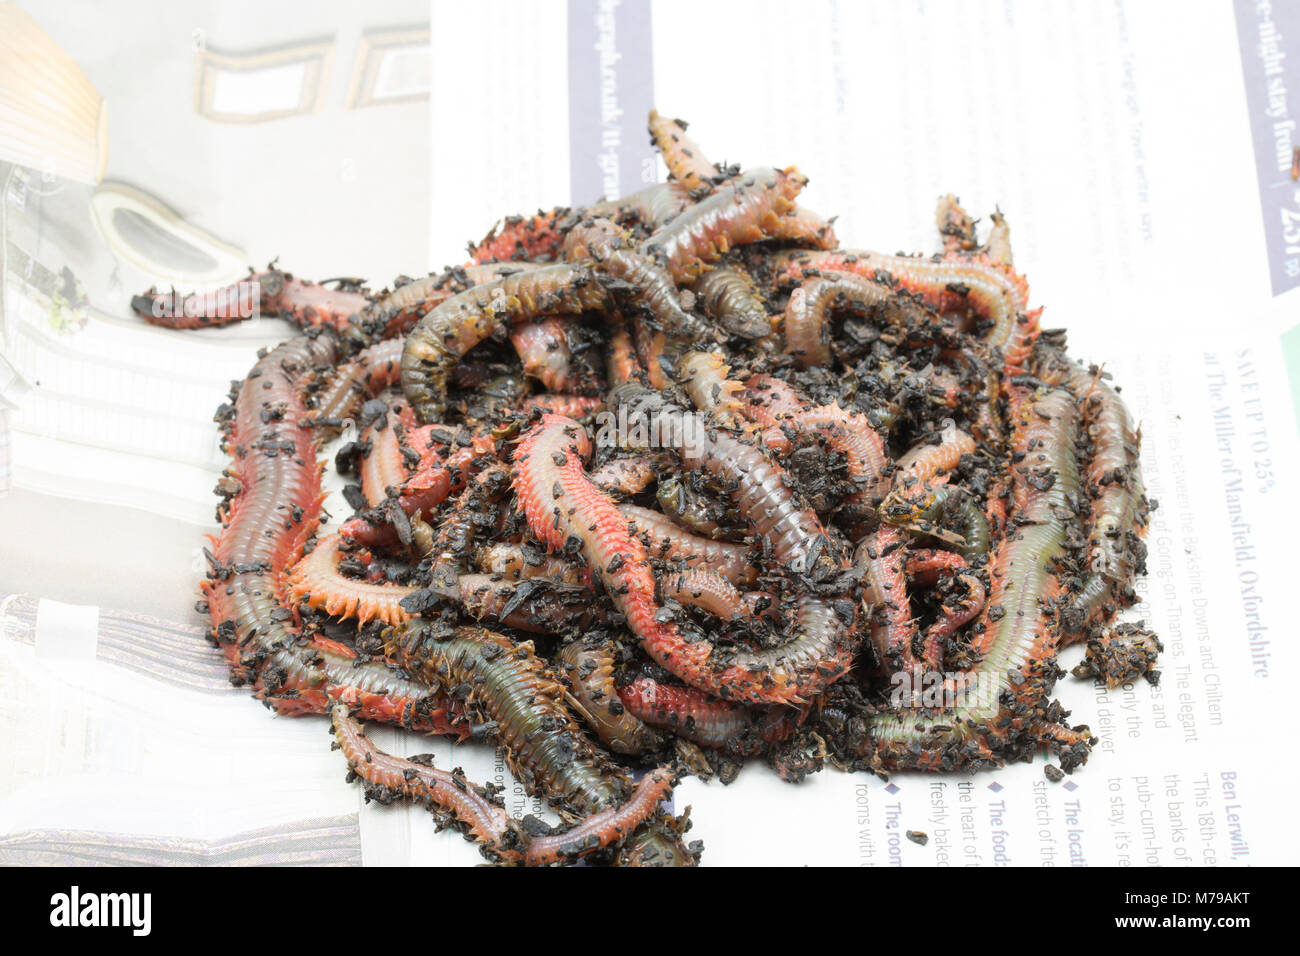 King ragworm Attila virens, Dorset UK. The king ragworm is a popular bait  for sea fishing. The worms have strong pincers and can grow over a foot  long Stock Photo - Alamy